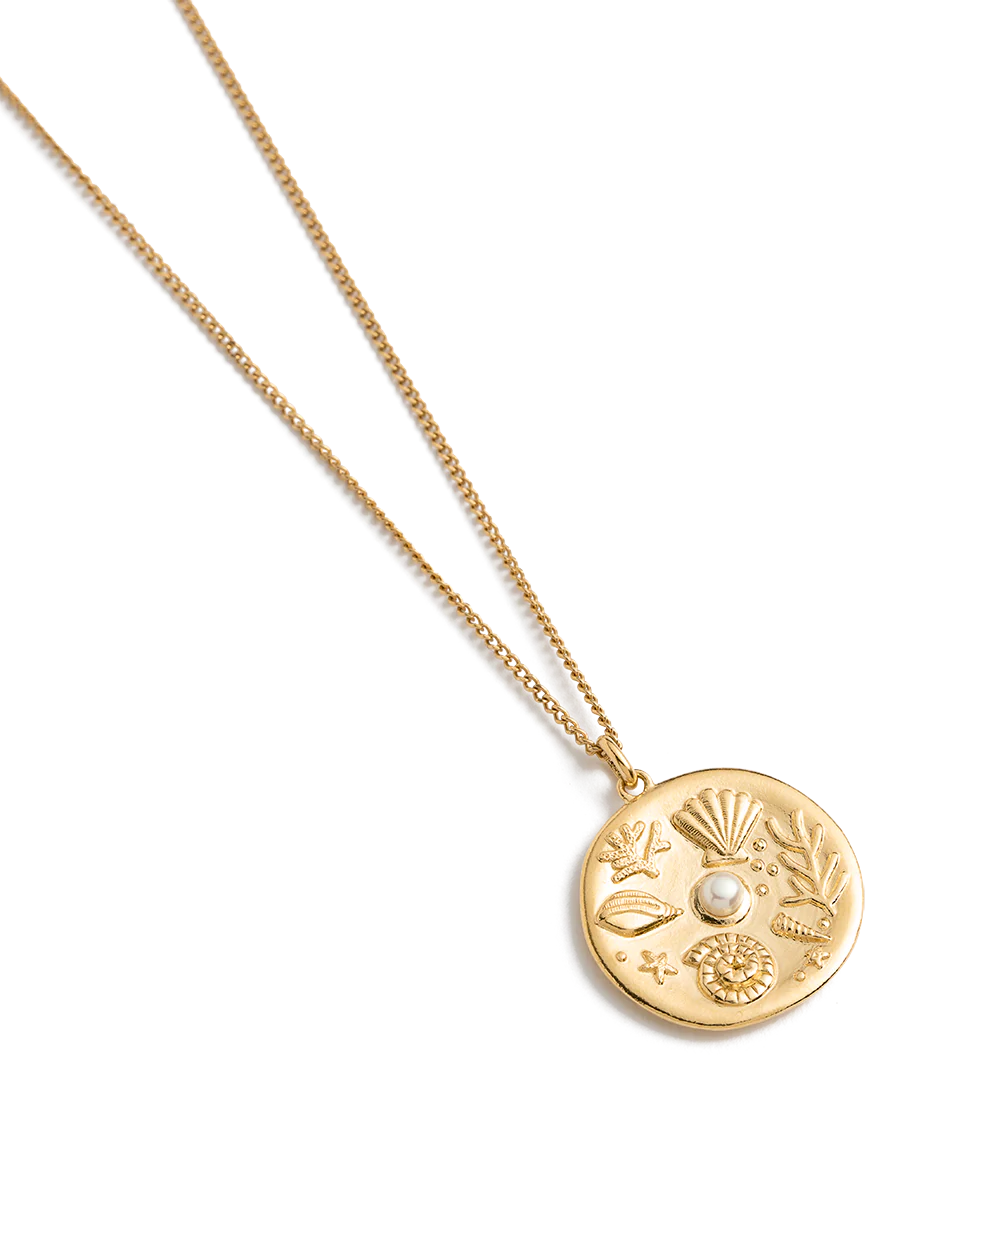 by-the-sea-coin-necklace-18k-gold-vermeil-side-web_1250x@2x